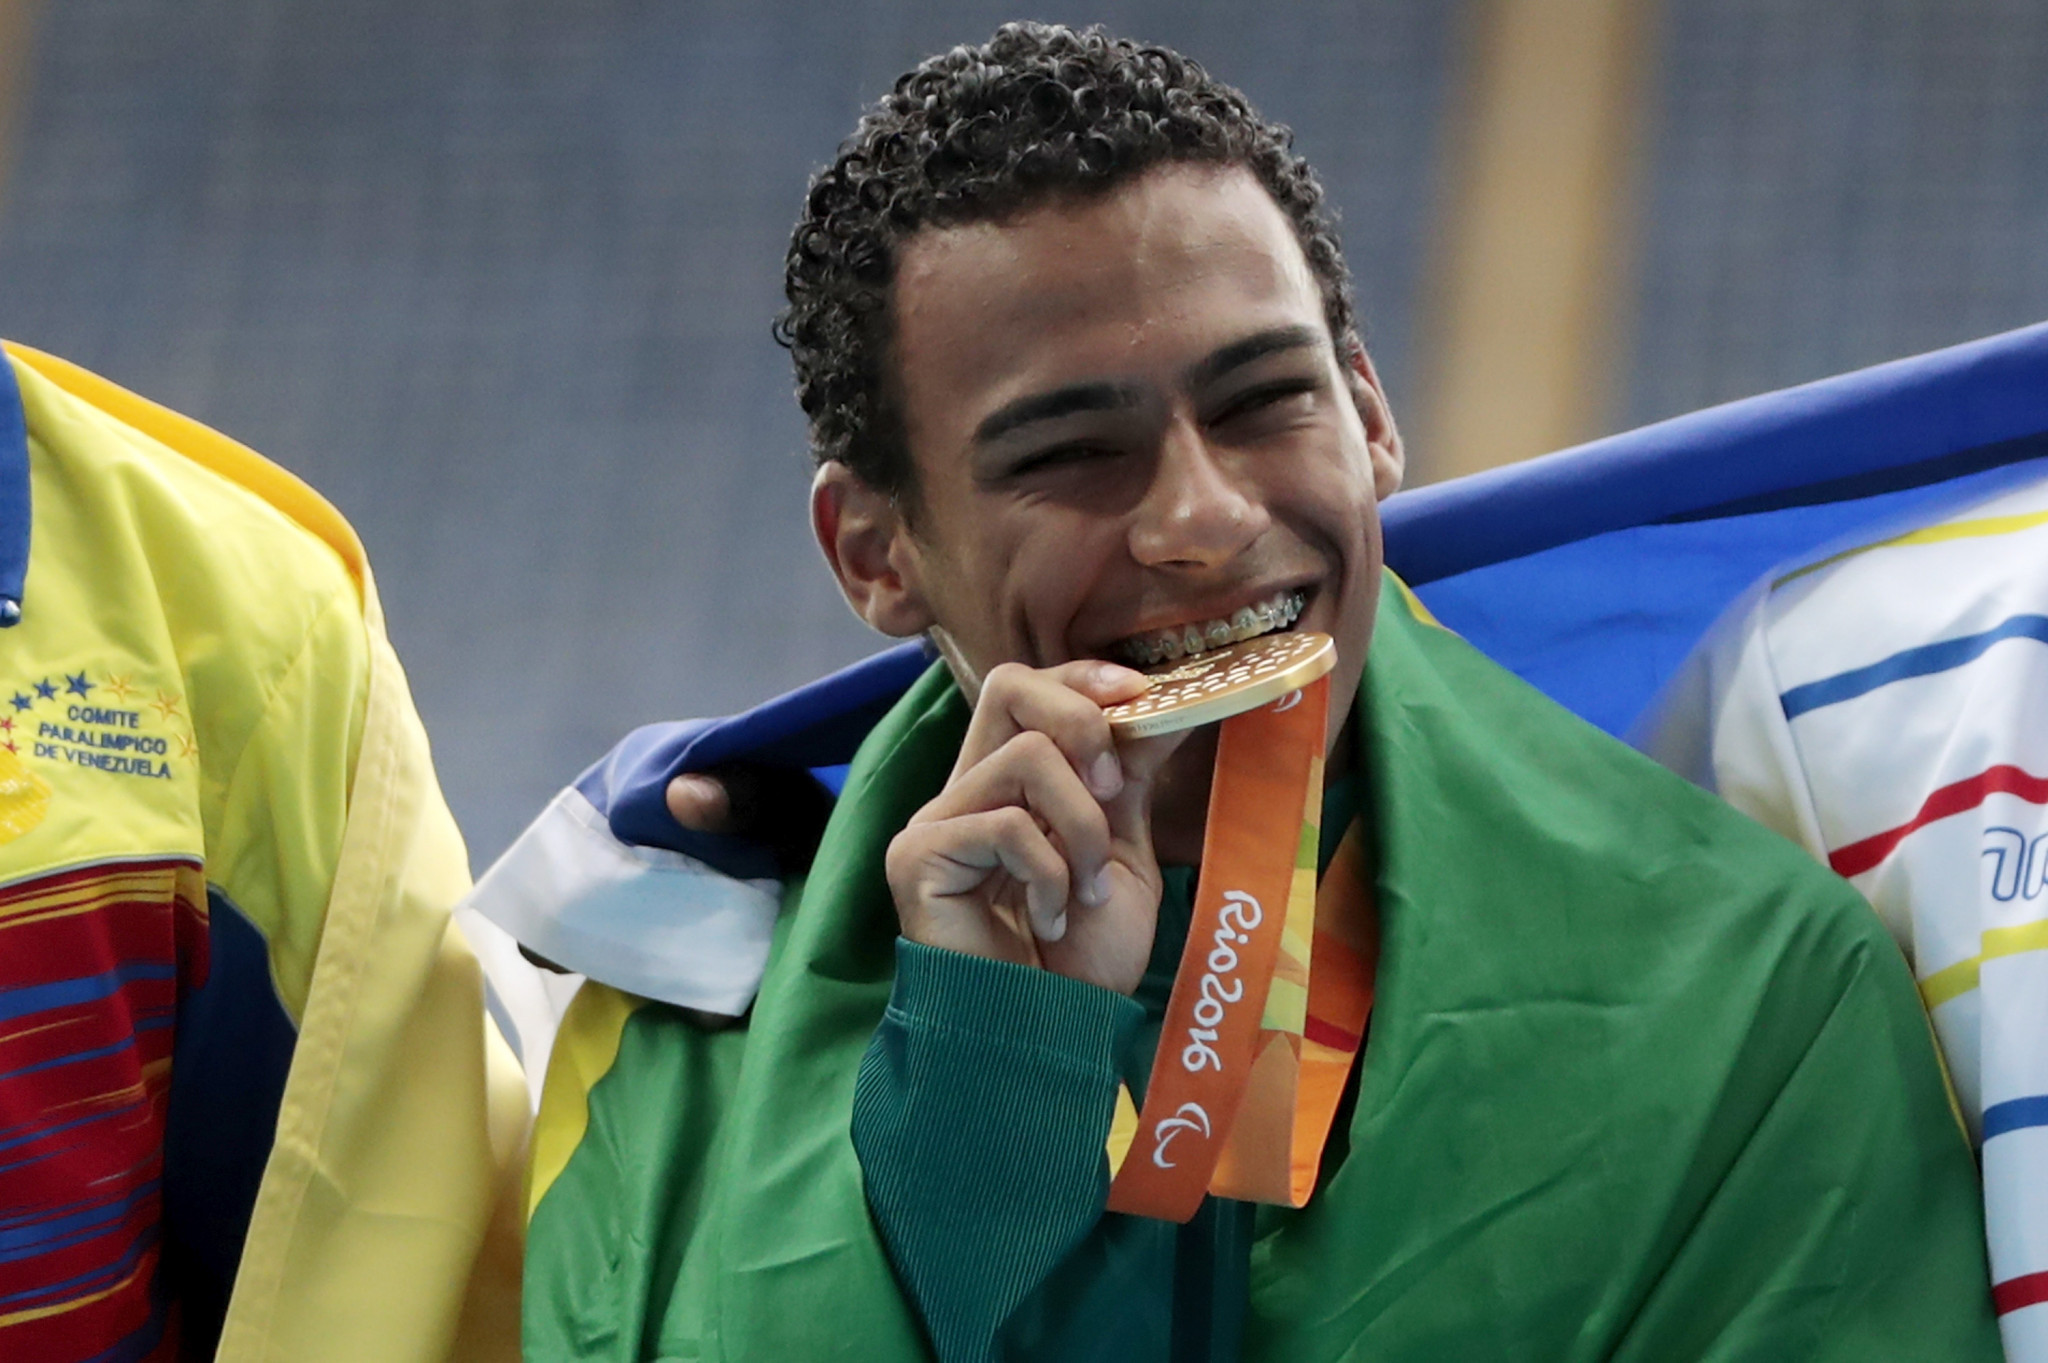 Brazilian runner Daniel Martins says the Global Games gave him the platform to win gold at Rio 2016 ©Getty Images